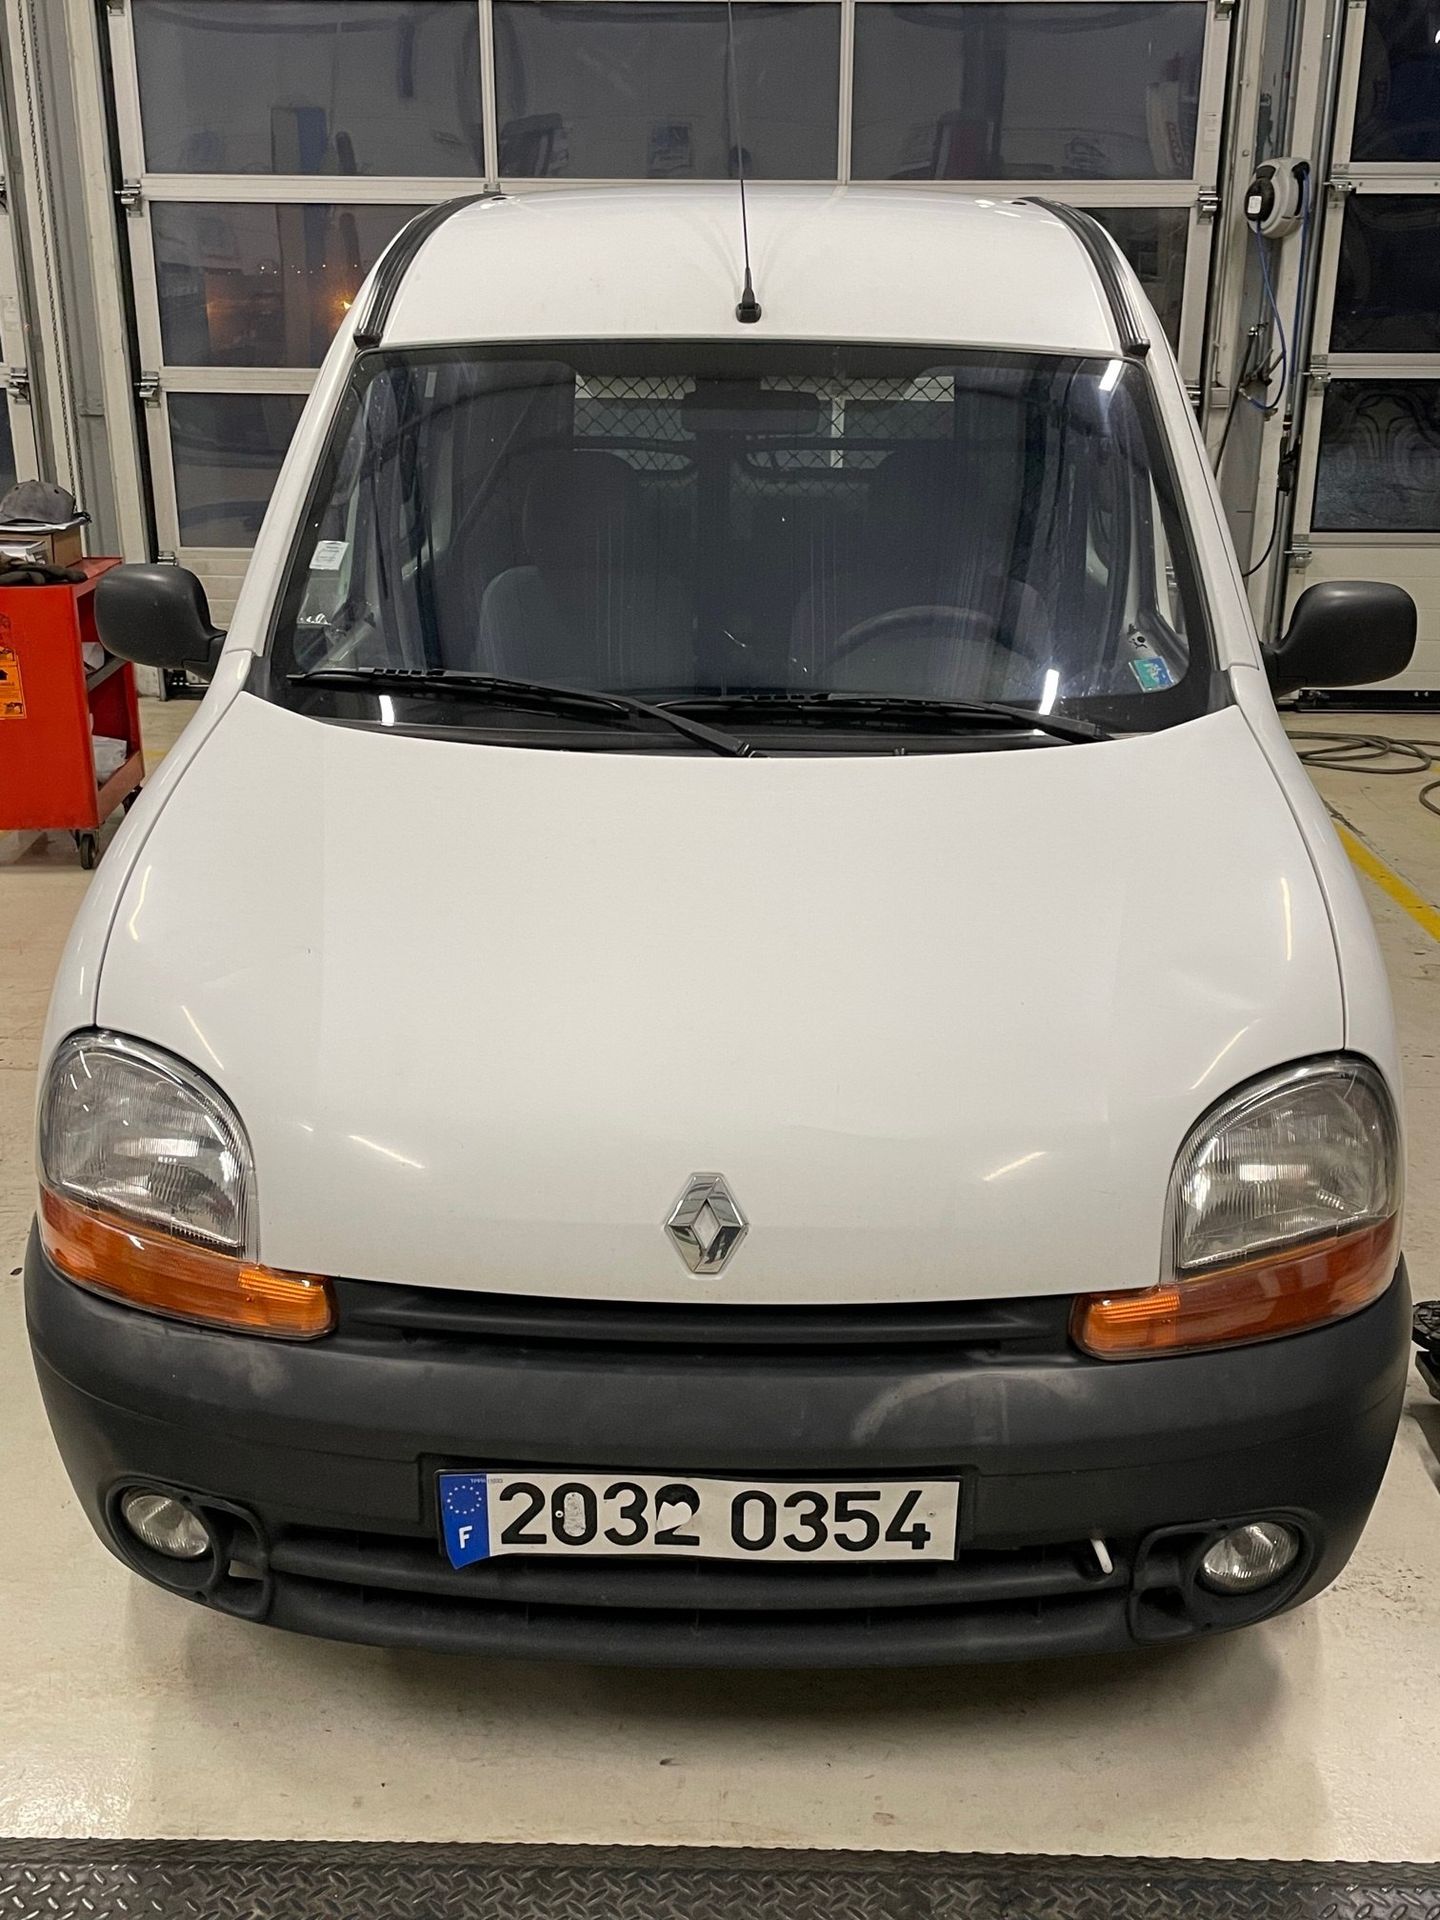 Null [RP][ACI] Reserved for automotive professionals.
Utility RENAULT Kangoo 1.9&hellip;